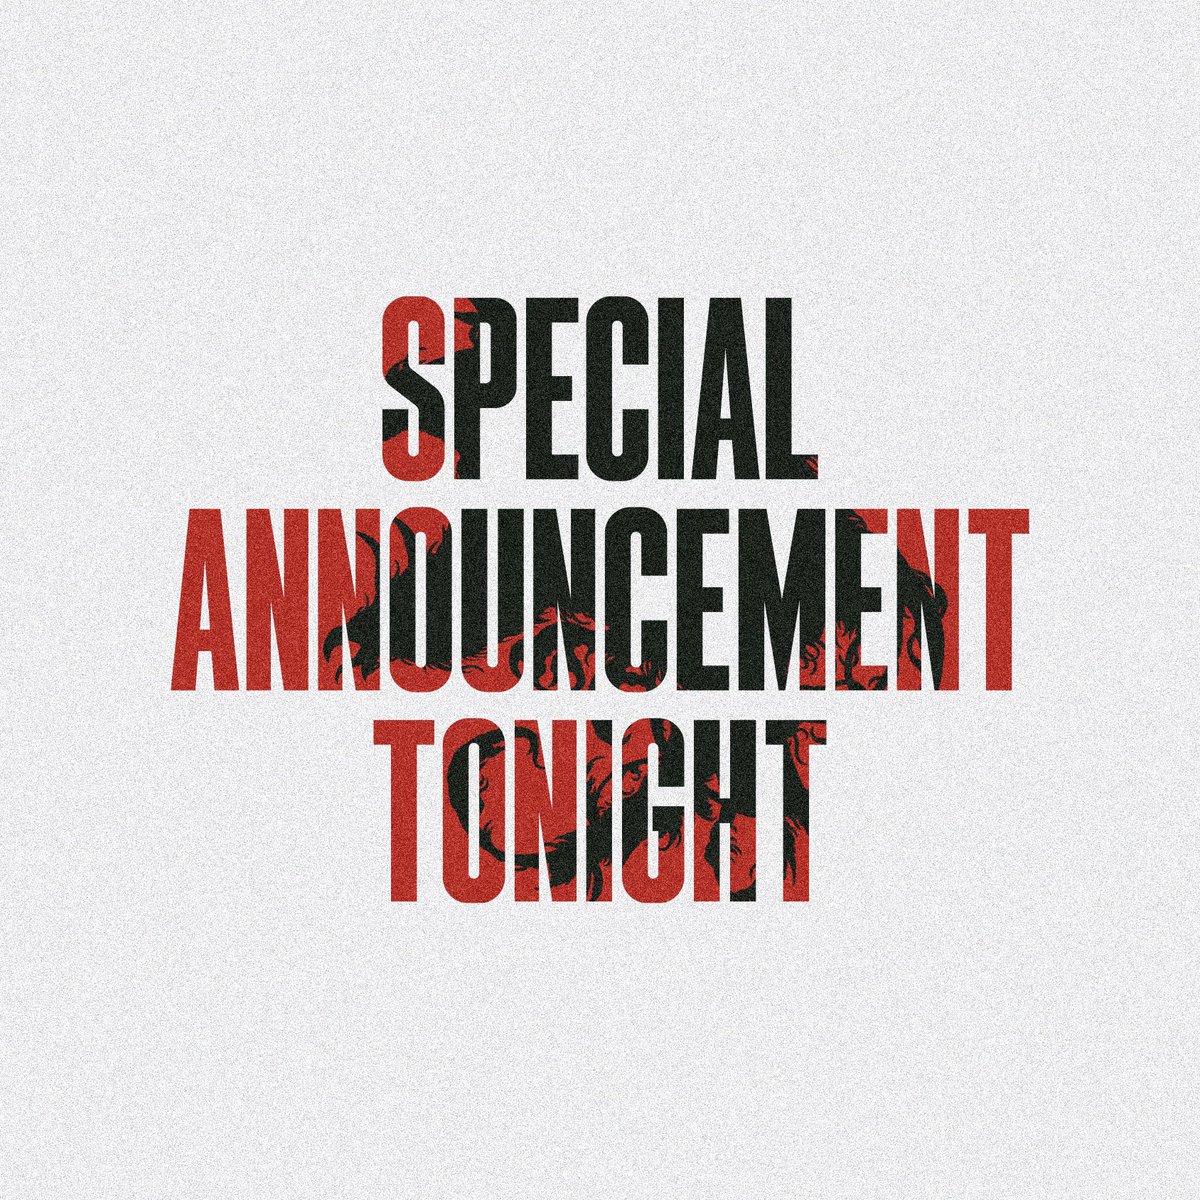 Special Announcement at 9PM